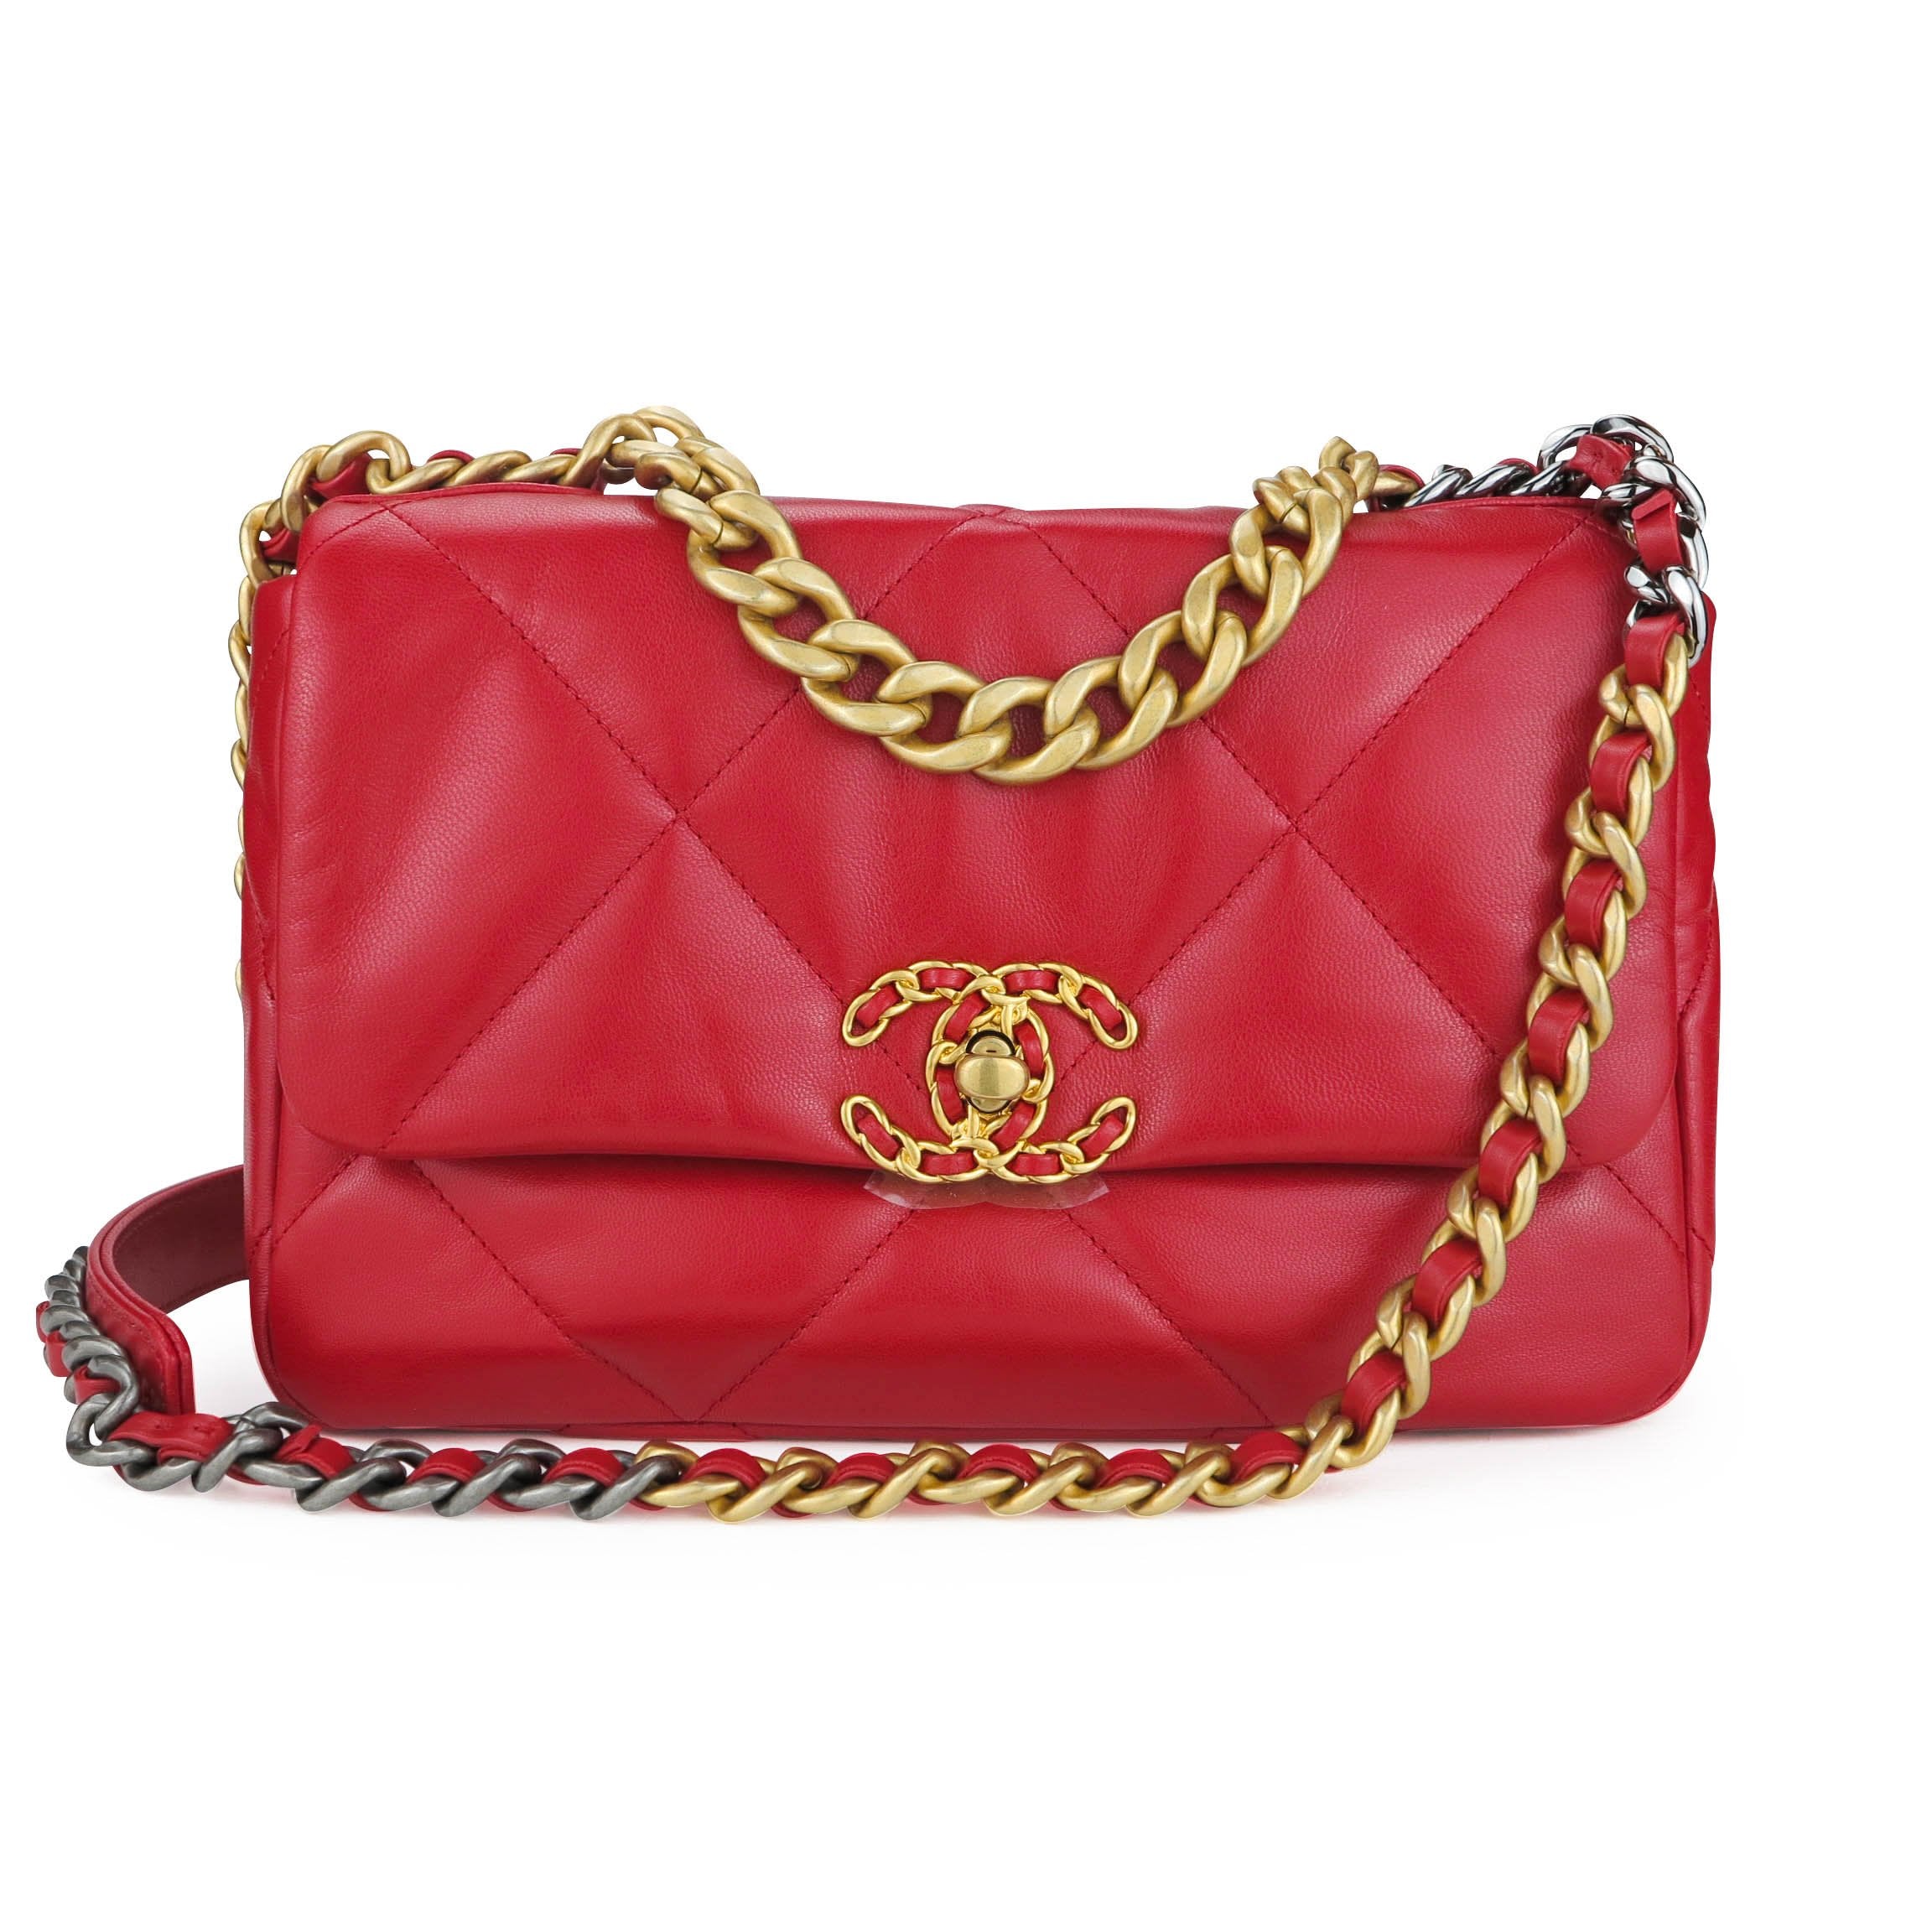 CHANEL 19 Small Flap Bag in Red Goatskin